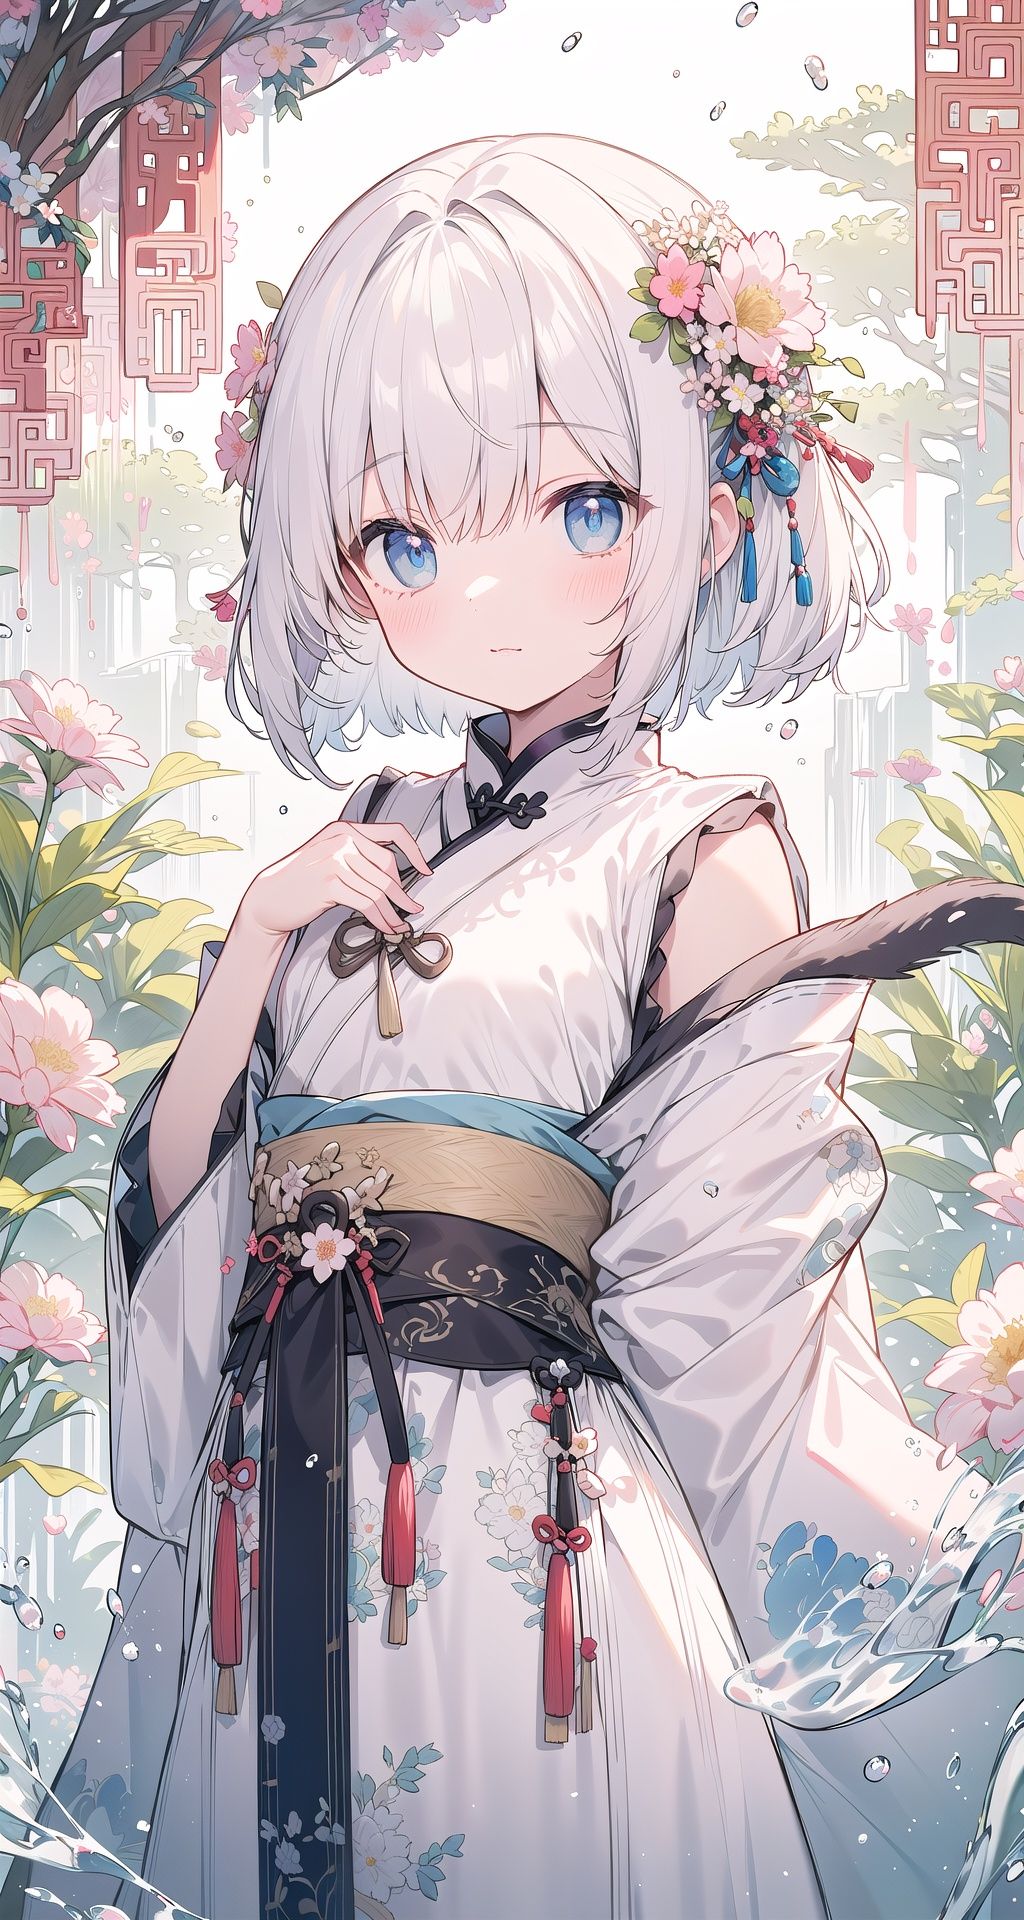 (((masterpiece))),best quality,watercolor,arms behind back,(((illustration)),((Chinese_style)),

(((beautiful detailed girl))),small chest,cat,tea,

((delicate cute face)),blue_eyes,watery_eyes,

bob_cut,white_hair,flower,

(hanfu),silky,pink,luxuriant,layered dress,

(in_spring),beautiful_landscape,light particles,